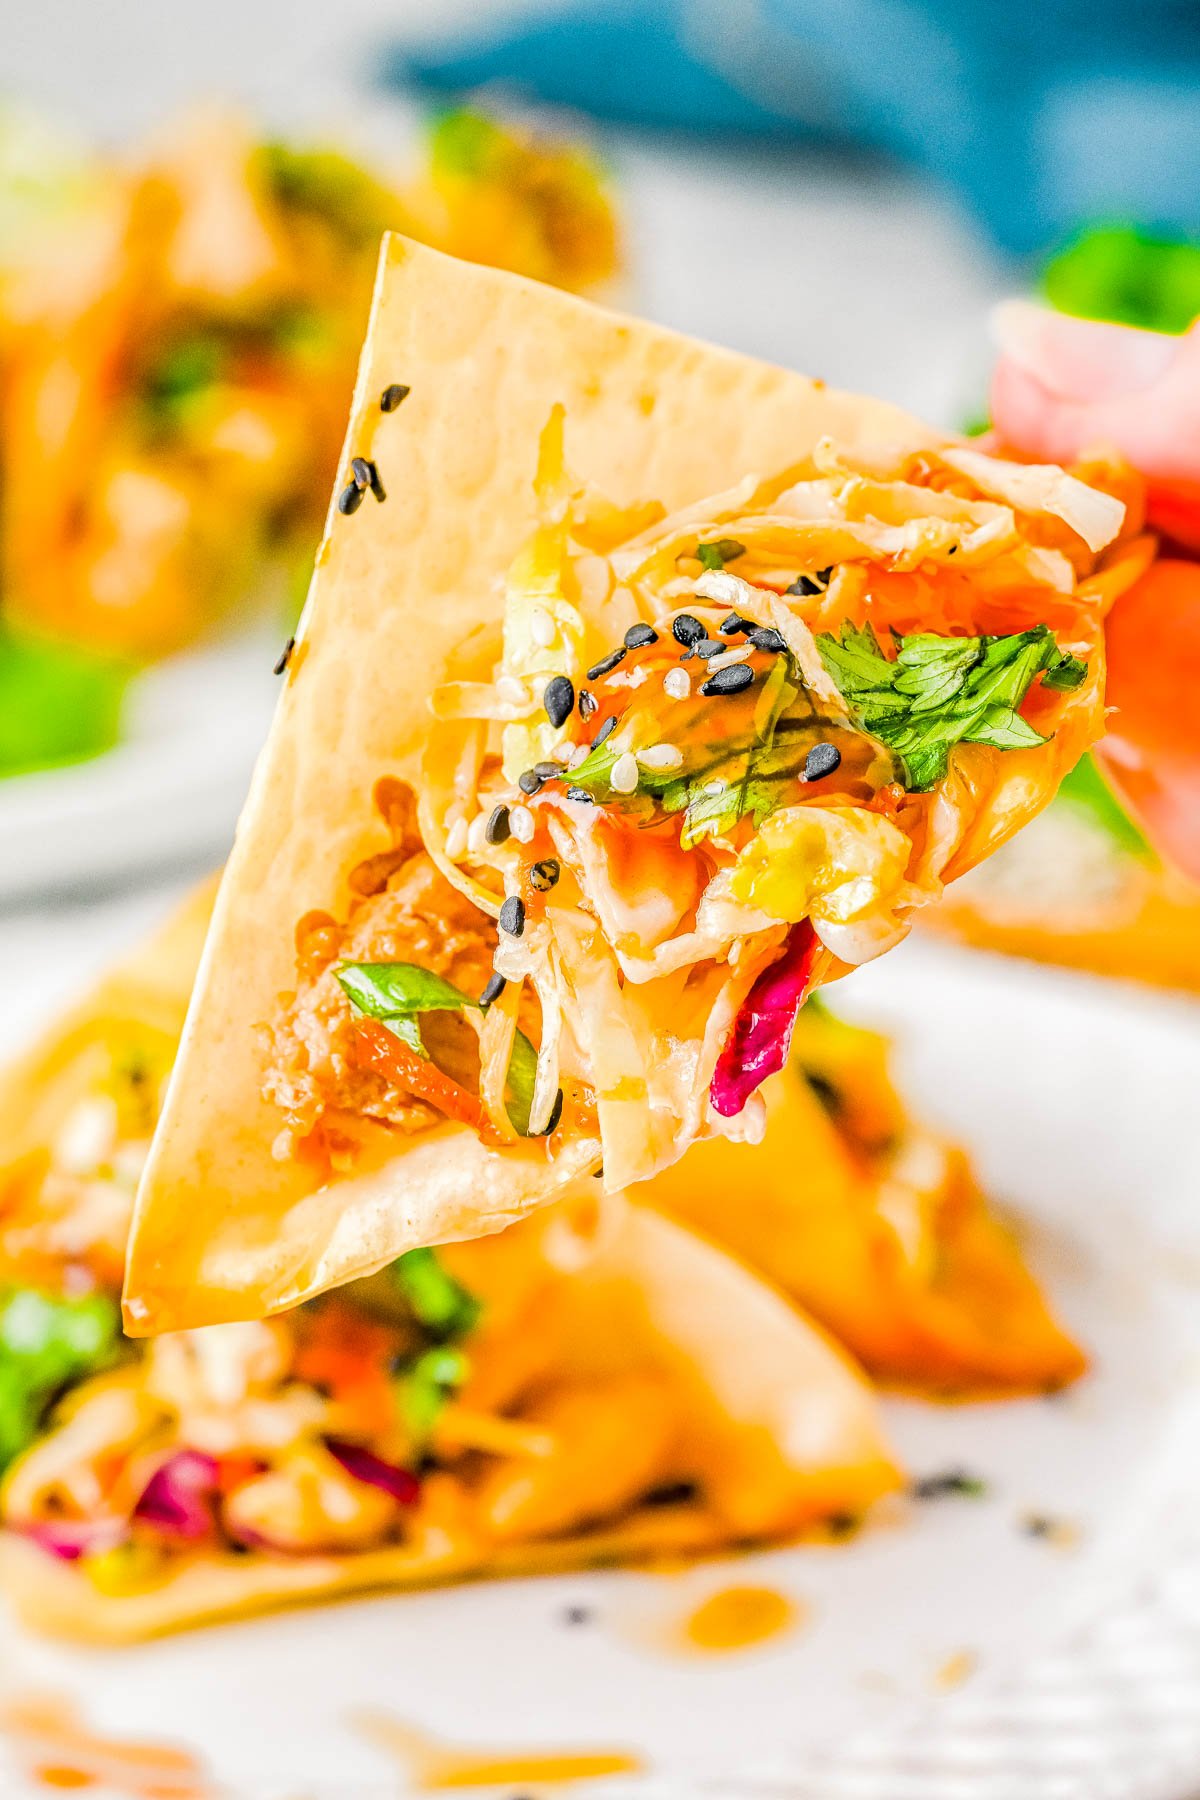 Copycat Applebee's Chicken Wonton Tacos — Crispy, crunchy wonton wrappers are filled with succulent teriyaki chicken and topped with sesame ginger coleslaw to create the best ever chicken wonton tacos! This is a homemade version of Applebee's wonton tacos, but fresher and tastier. If you love Asian-fusion recipes, you’re going to love these tacos!   